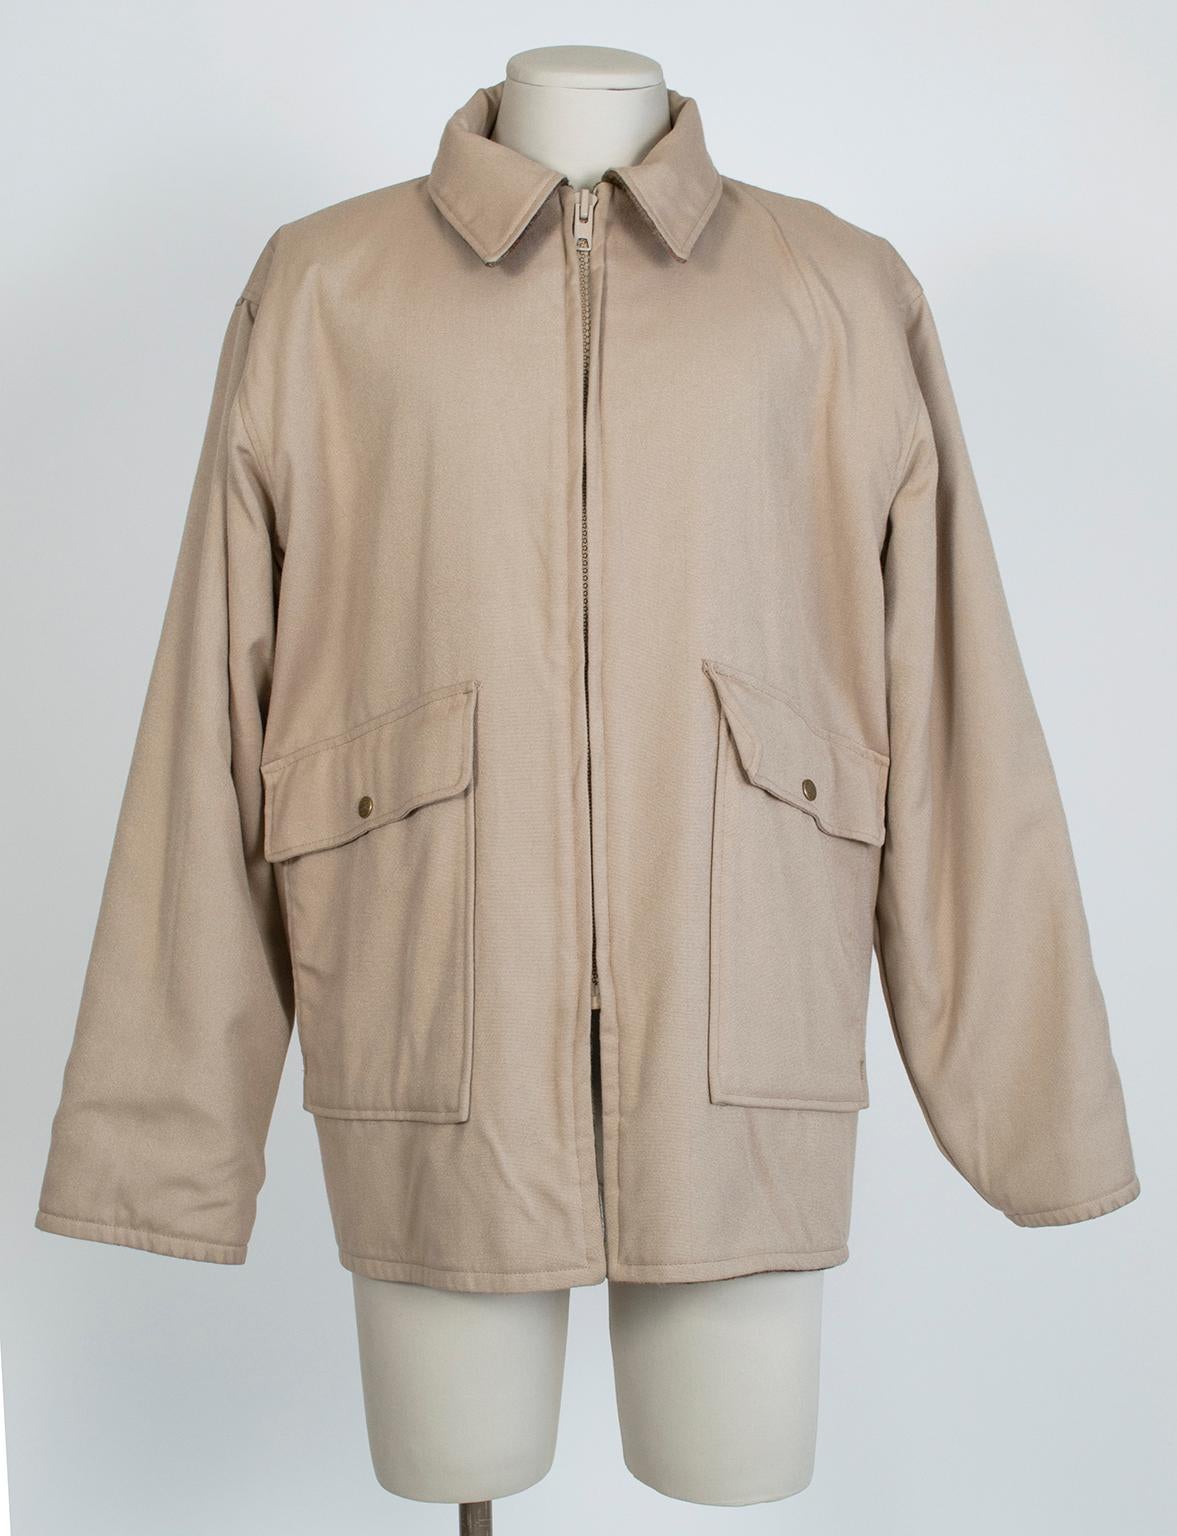 From the estate of an avid hunter and fly fisherman, this reversible field jacket is the real thing, complete with flap pockets for tackle, handwarmer pockets for warmth and a zippered through-pocket in the back for your catch. Luxuriously heavy and